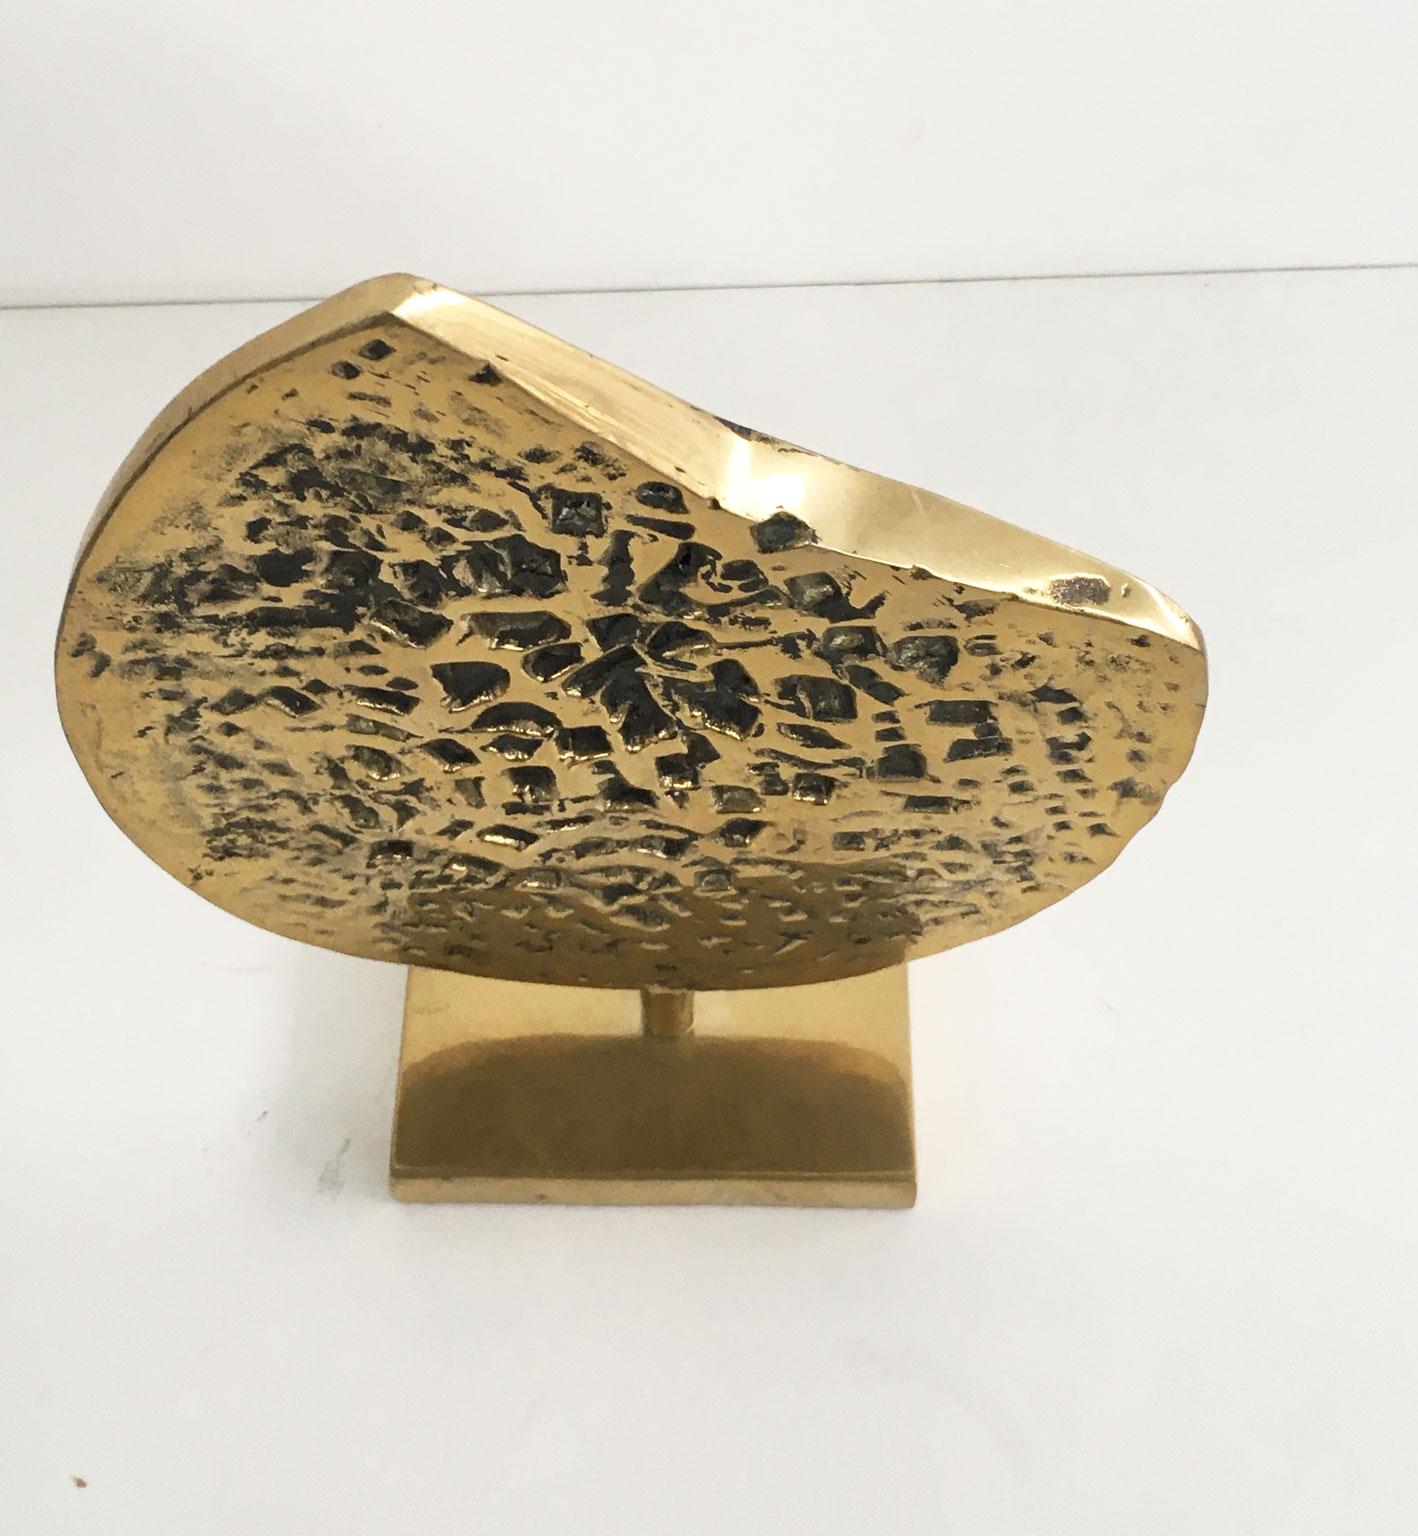 1980 Italy Bronze Abstract Sculpture by Lino Tiné Albero Città City Tree For Sale 1